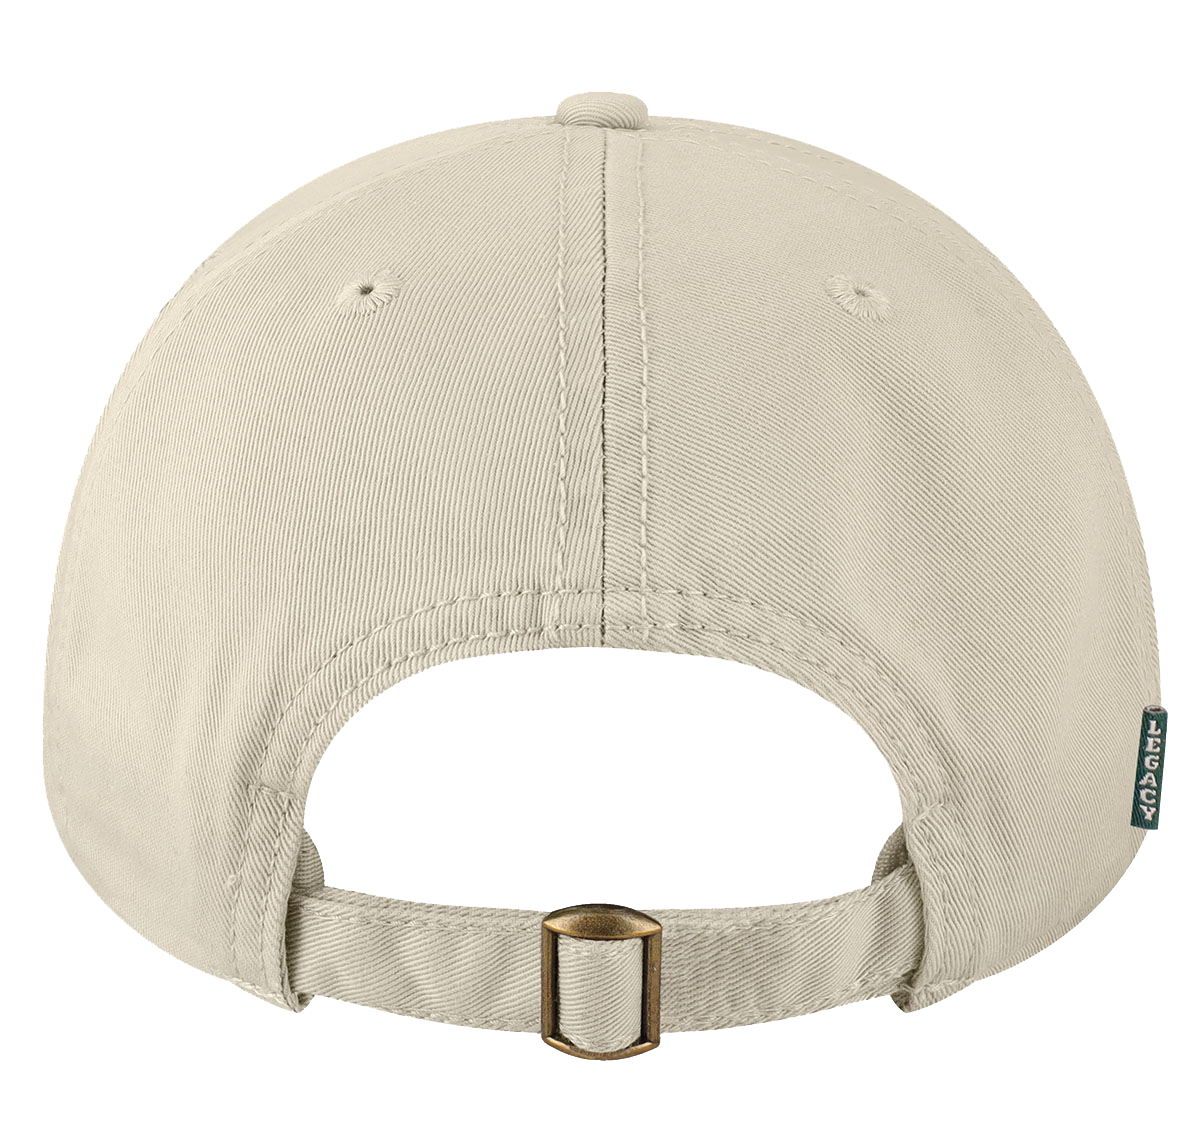 AAGPBL Hat - Chicago Colleens